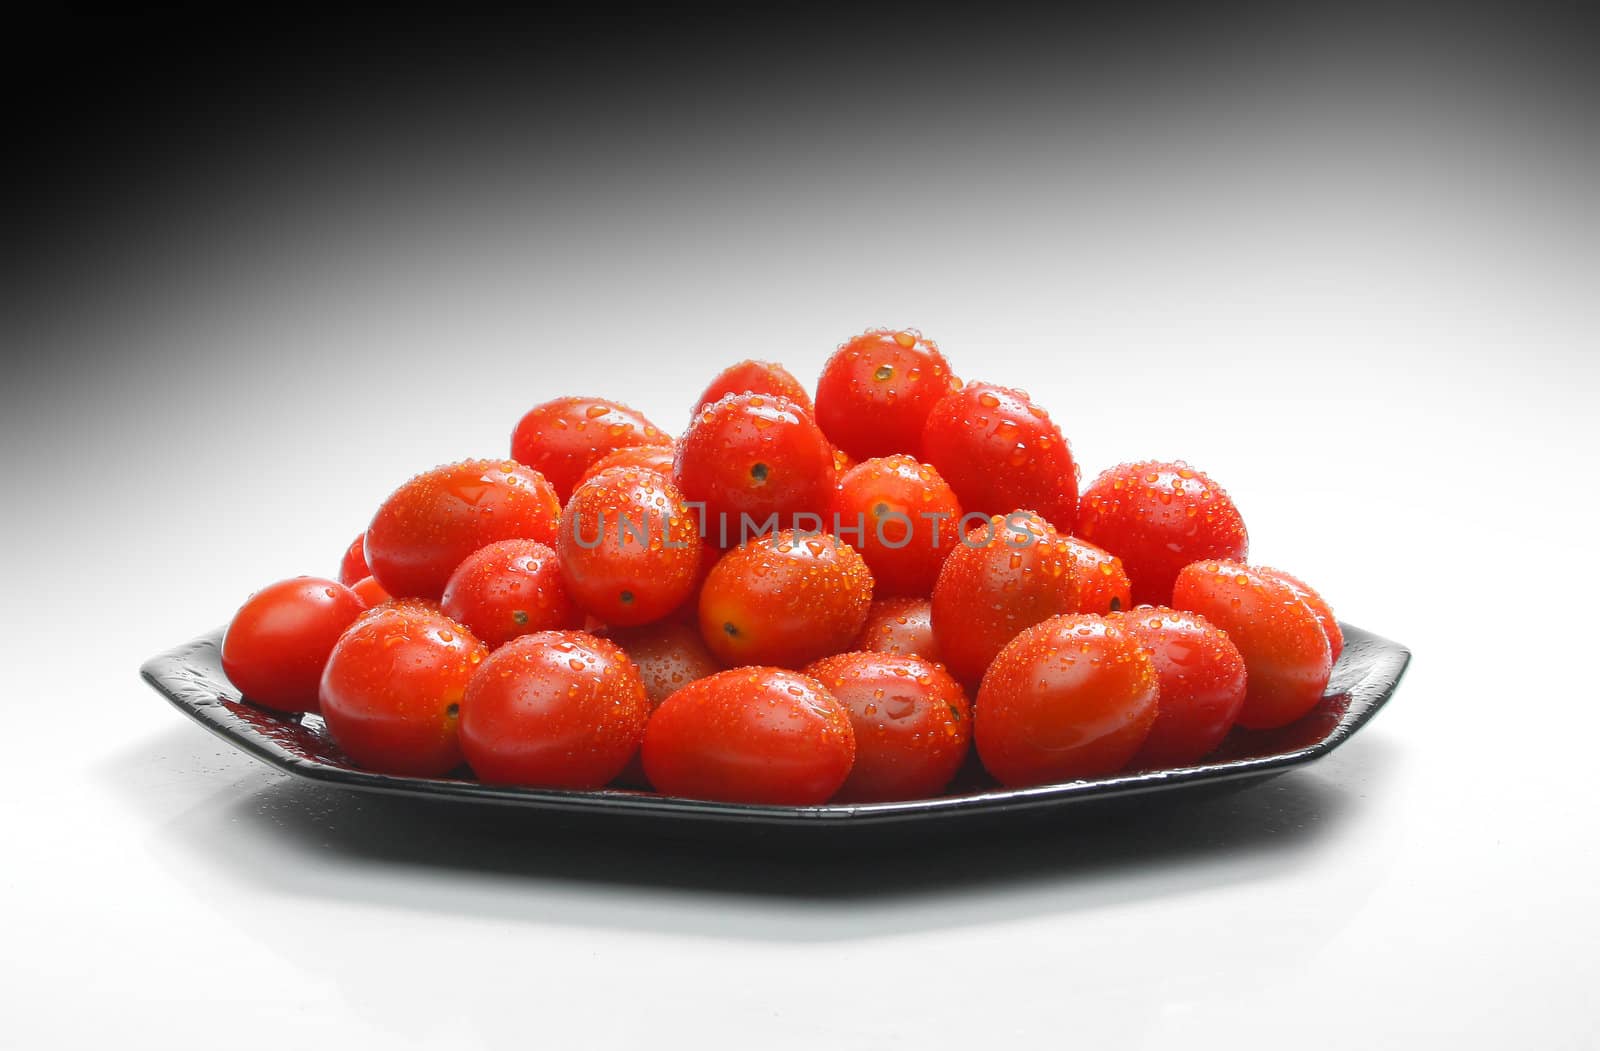 Lot of cherry tomatoes with drops over a black plate. Look at my gallery for more fresh fruits and vegetables.